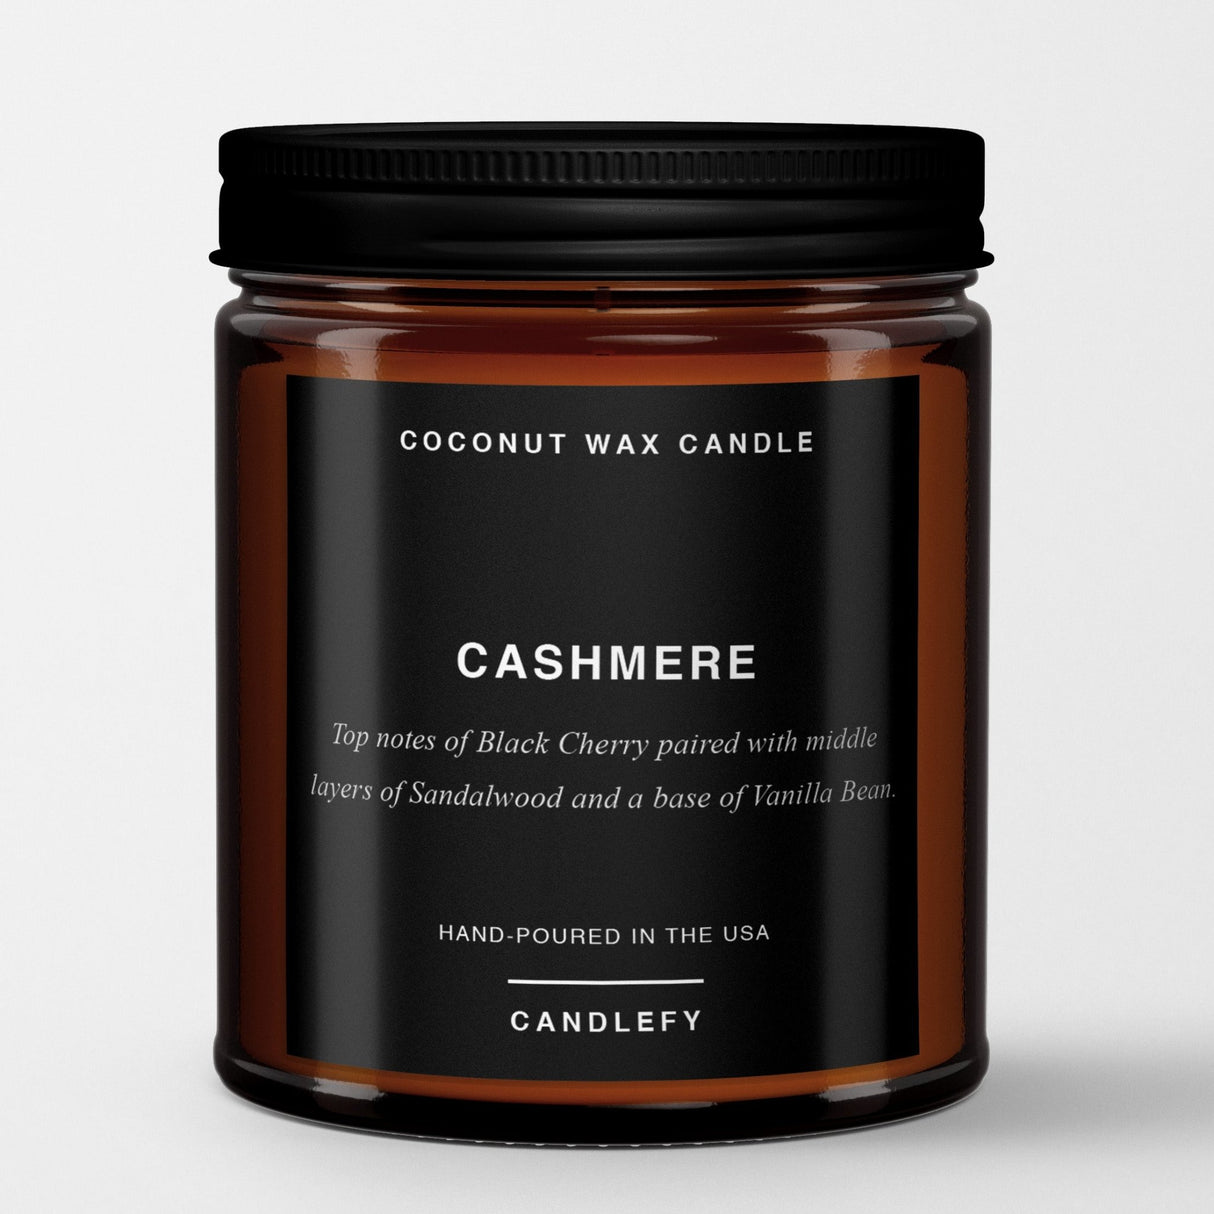 Cashmere: Scented Candle in Amber Glass, Made with Natural Coconut Wax - Candlefy